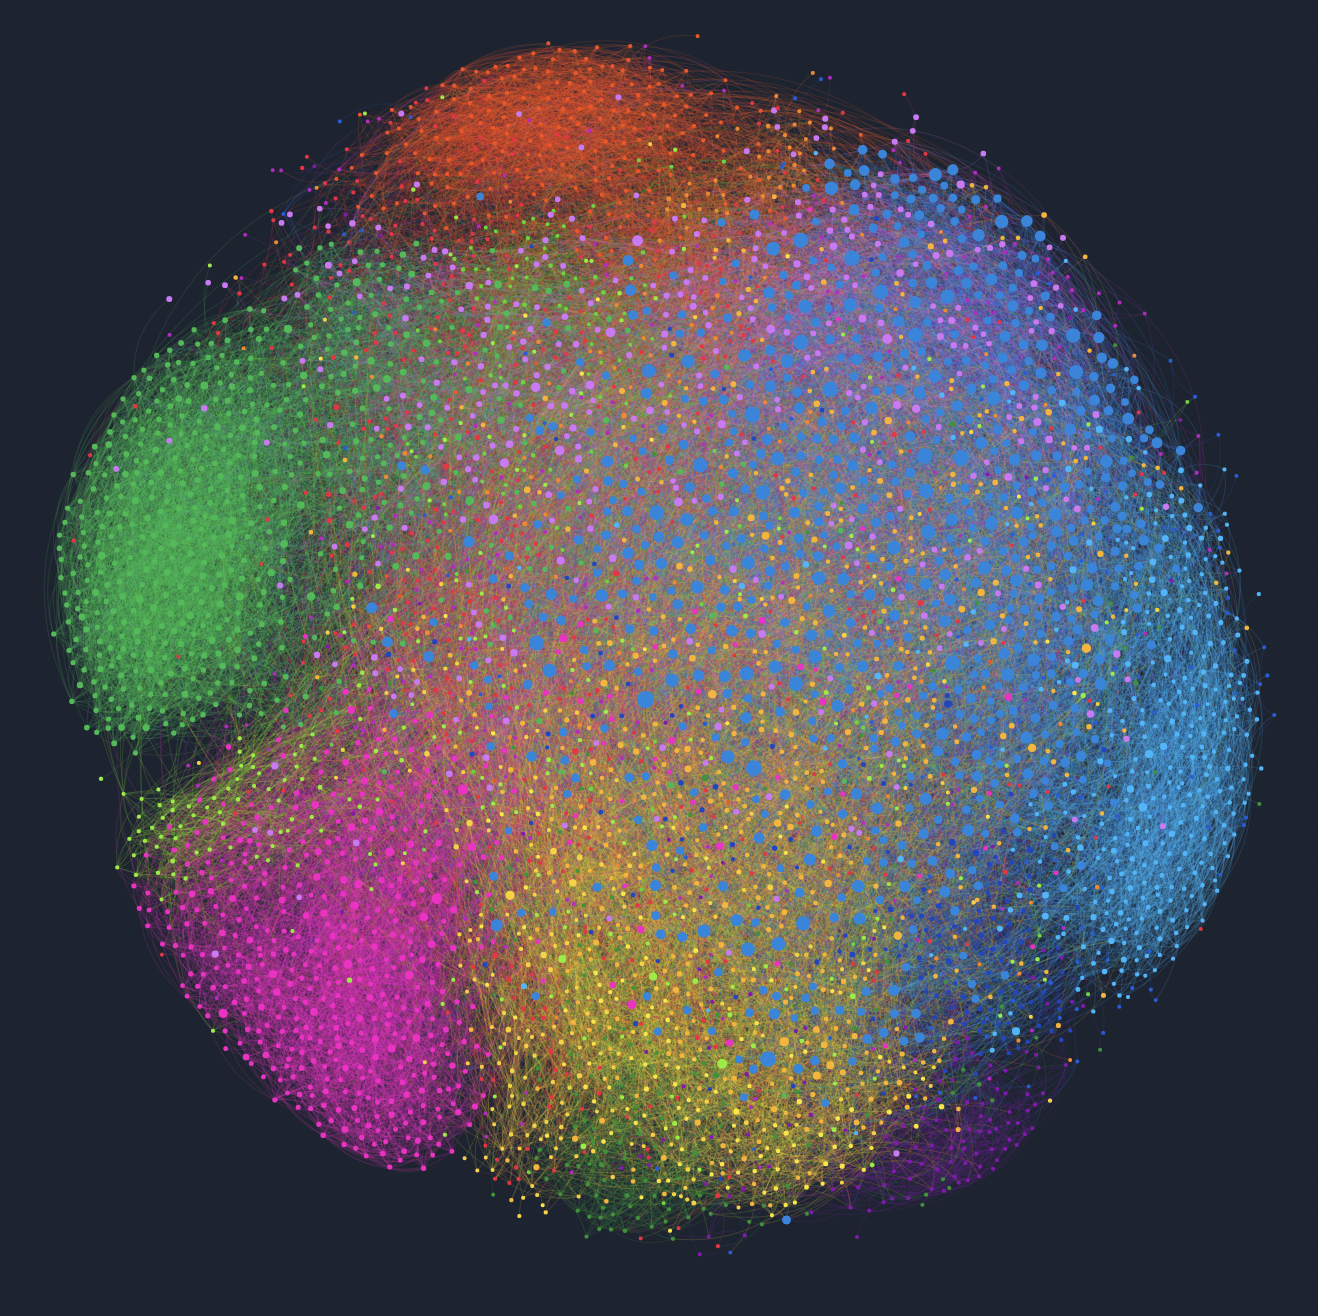 Network visualisation of the audience behind the growing NoLo movement as seen on the Fifty platform.